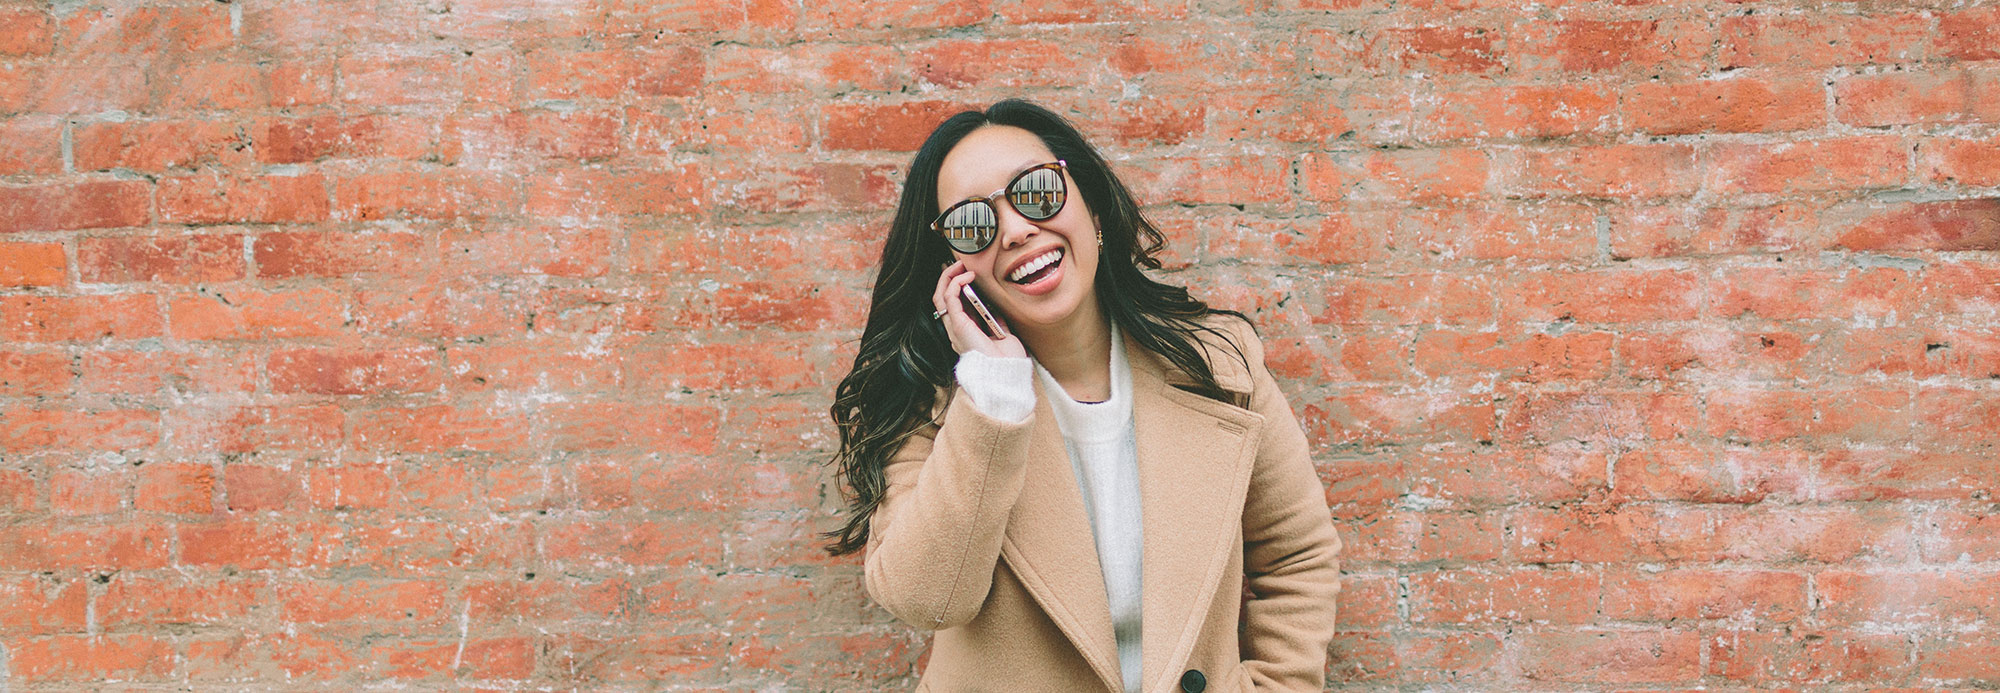 A woman talking on her phone and smiling outdoors in front of a brick wall